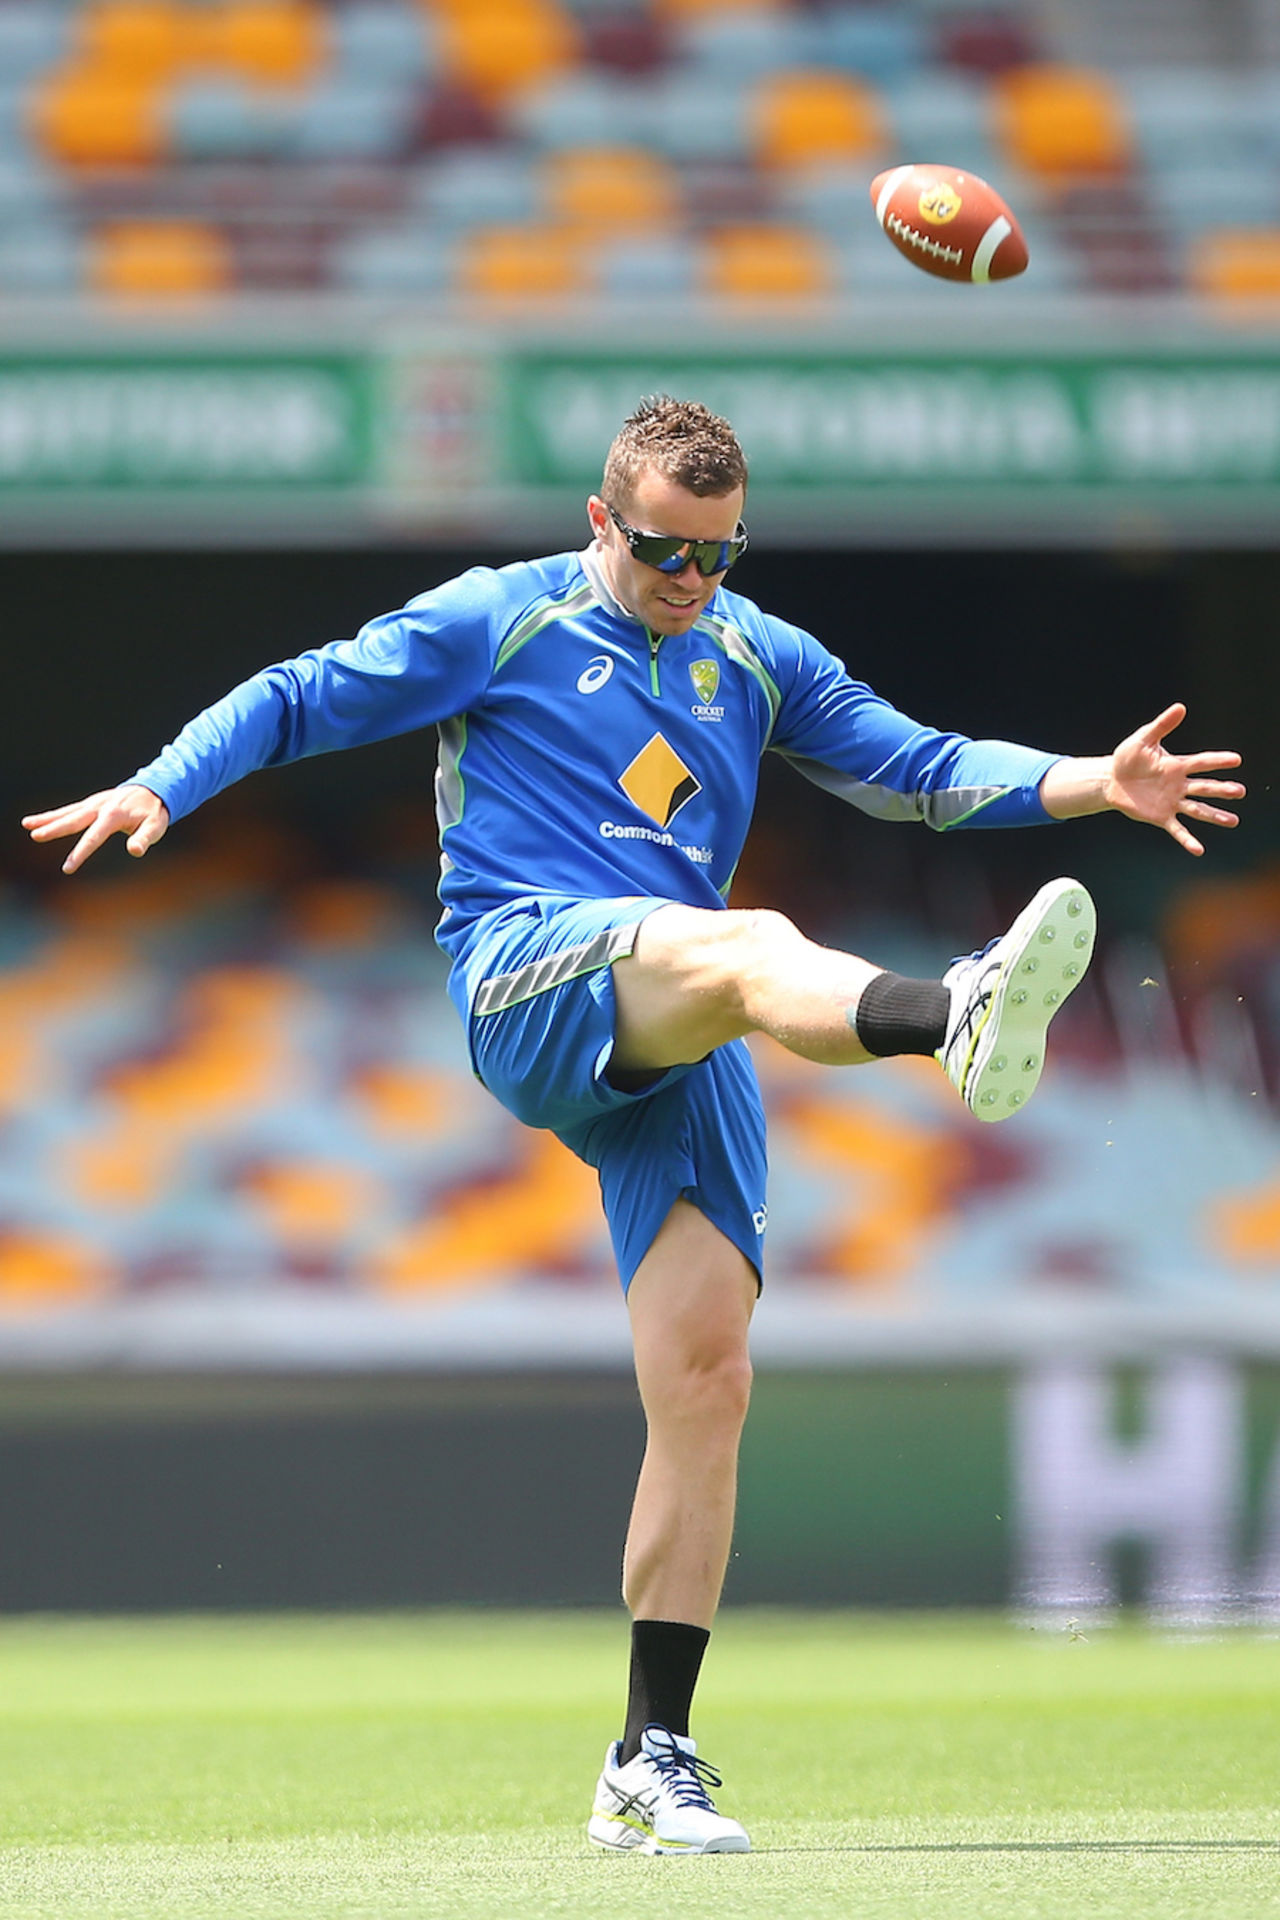 Peter Siddle kicks a football around during a practice session , Brisbane, November 4, 2015